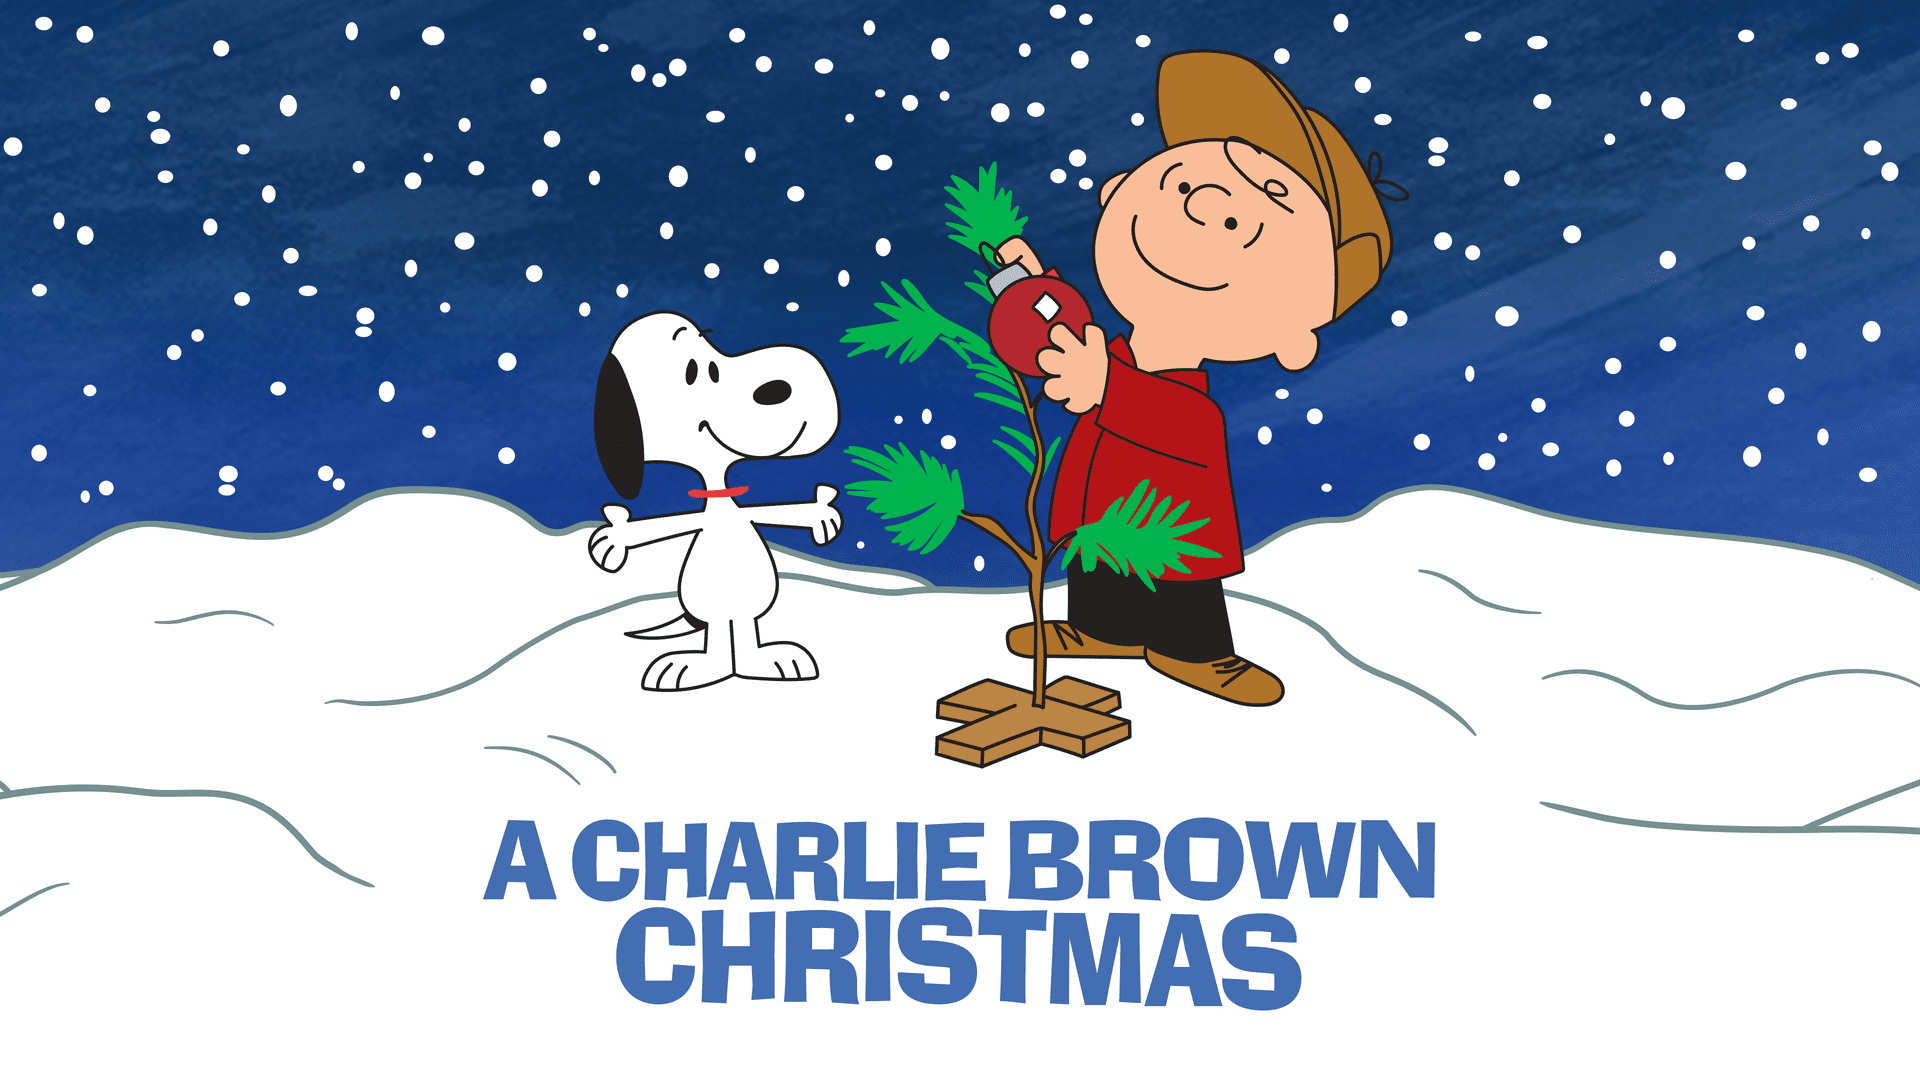 Apple Pbs Team Up For Broadcasts Of A Charlie Brown